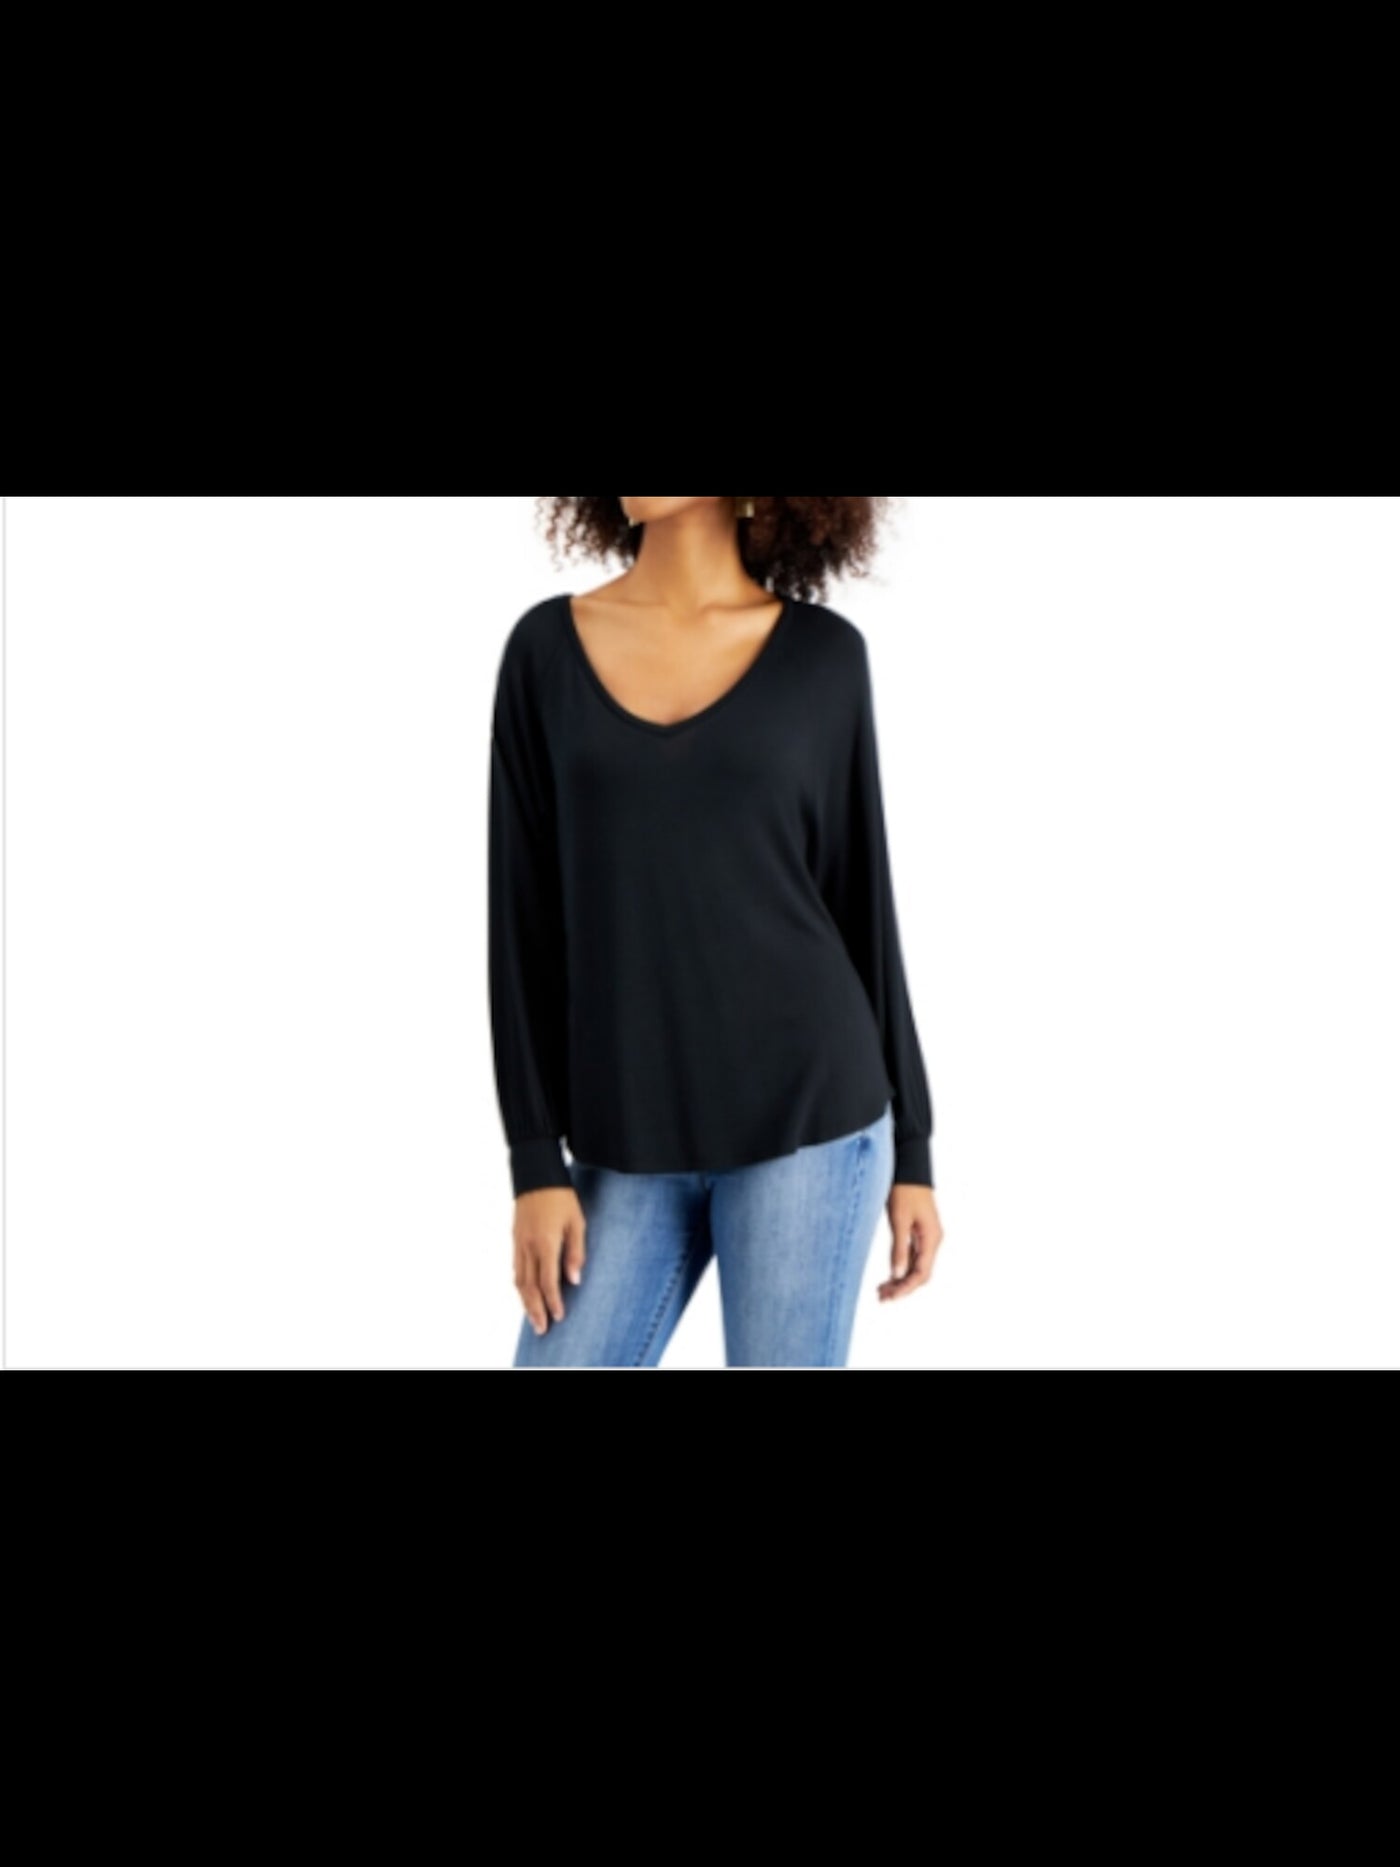 WILLOW DRIVE Womens Black Long Sleeve V Neck Top M